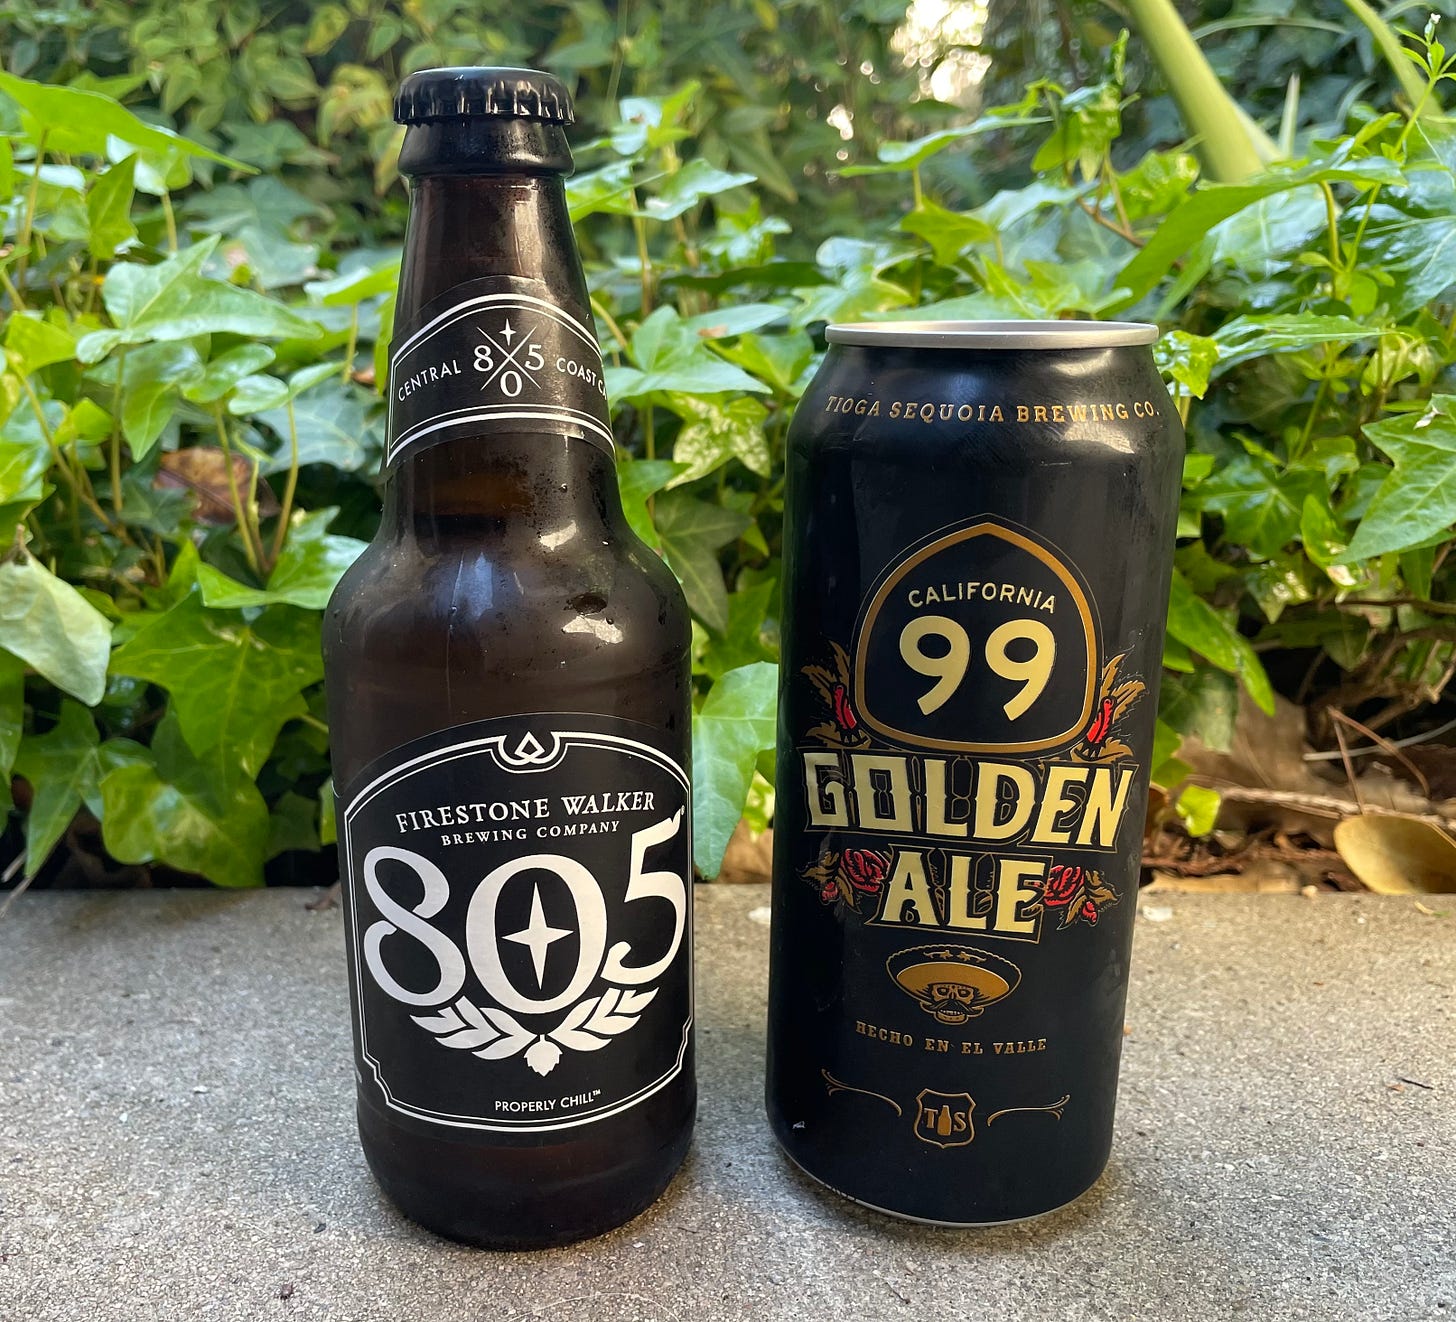 A bottle of Firestone Walker's 805 and a can of Tioga Sequoia's 99 Golden Ale